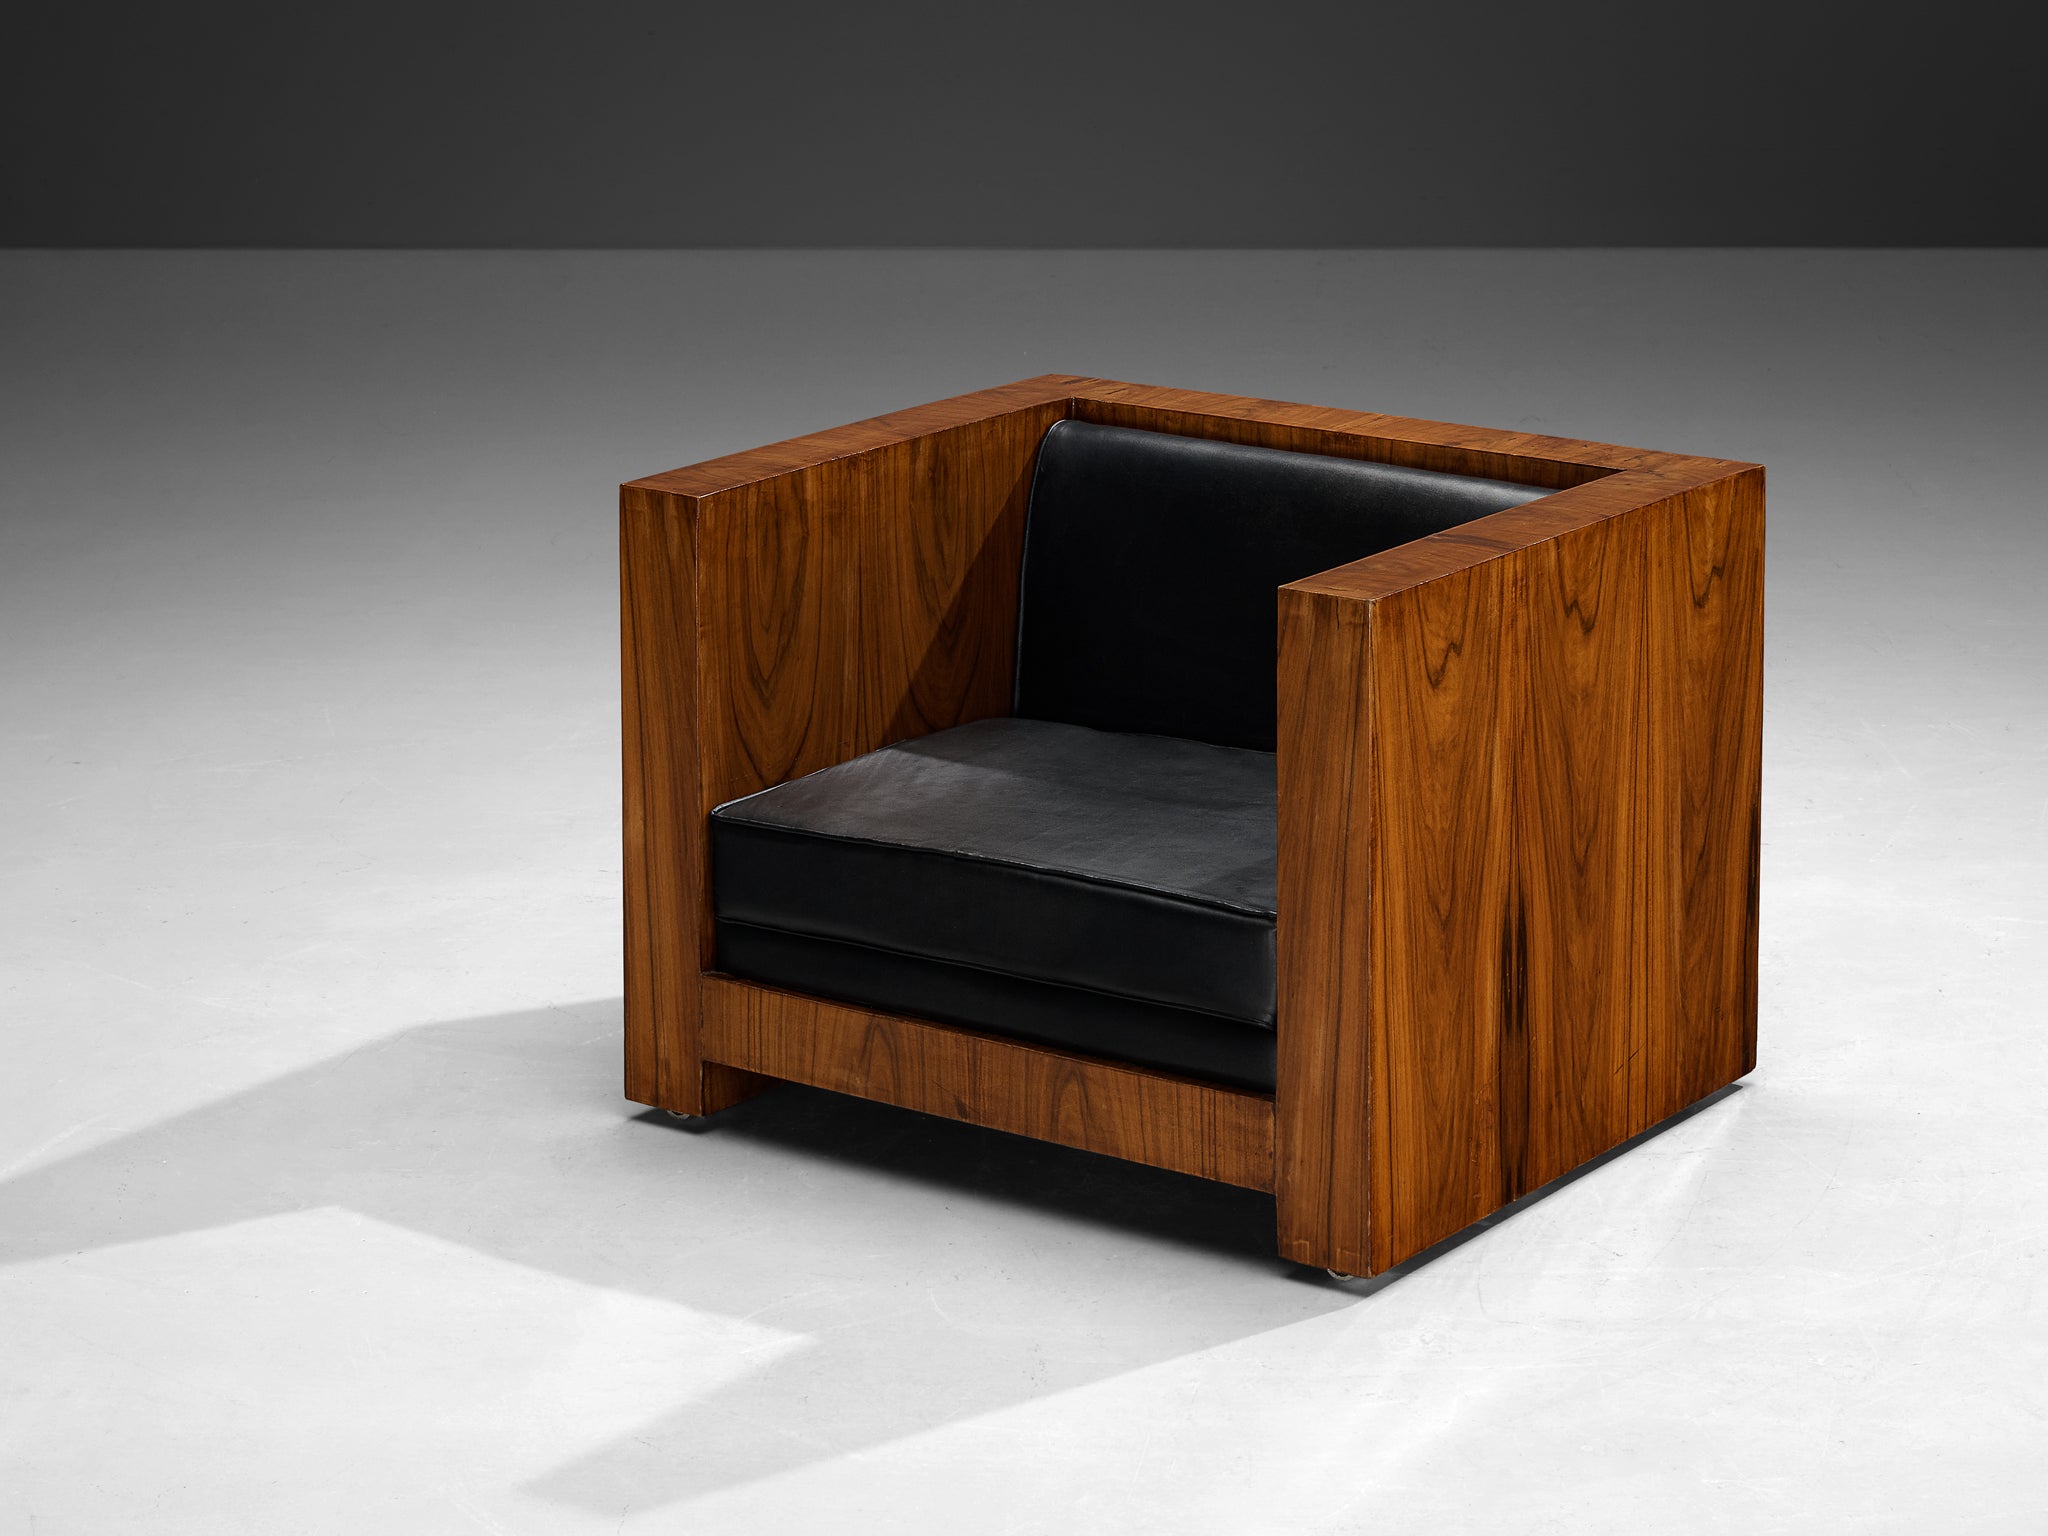 Italian Cubic Lounge Chair in Walnut and Black Upholstery